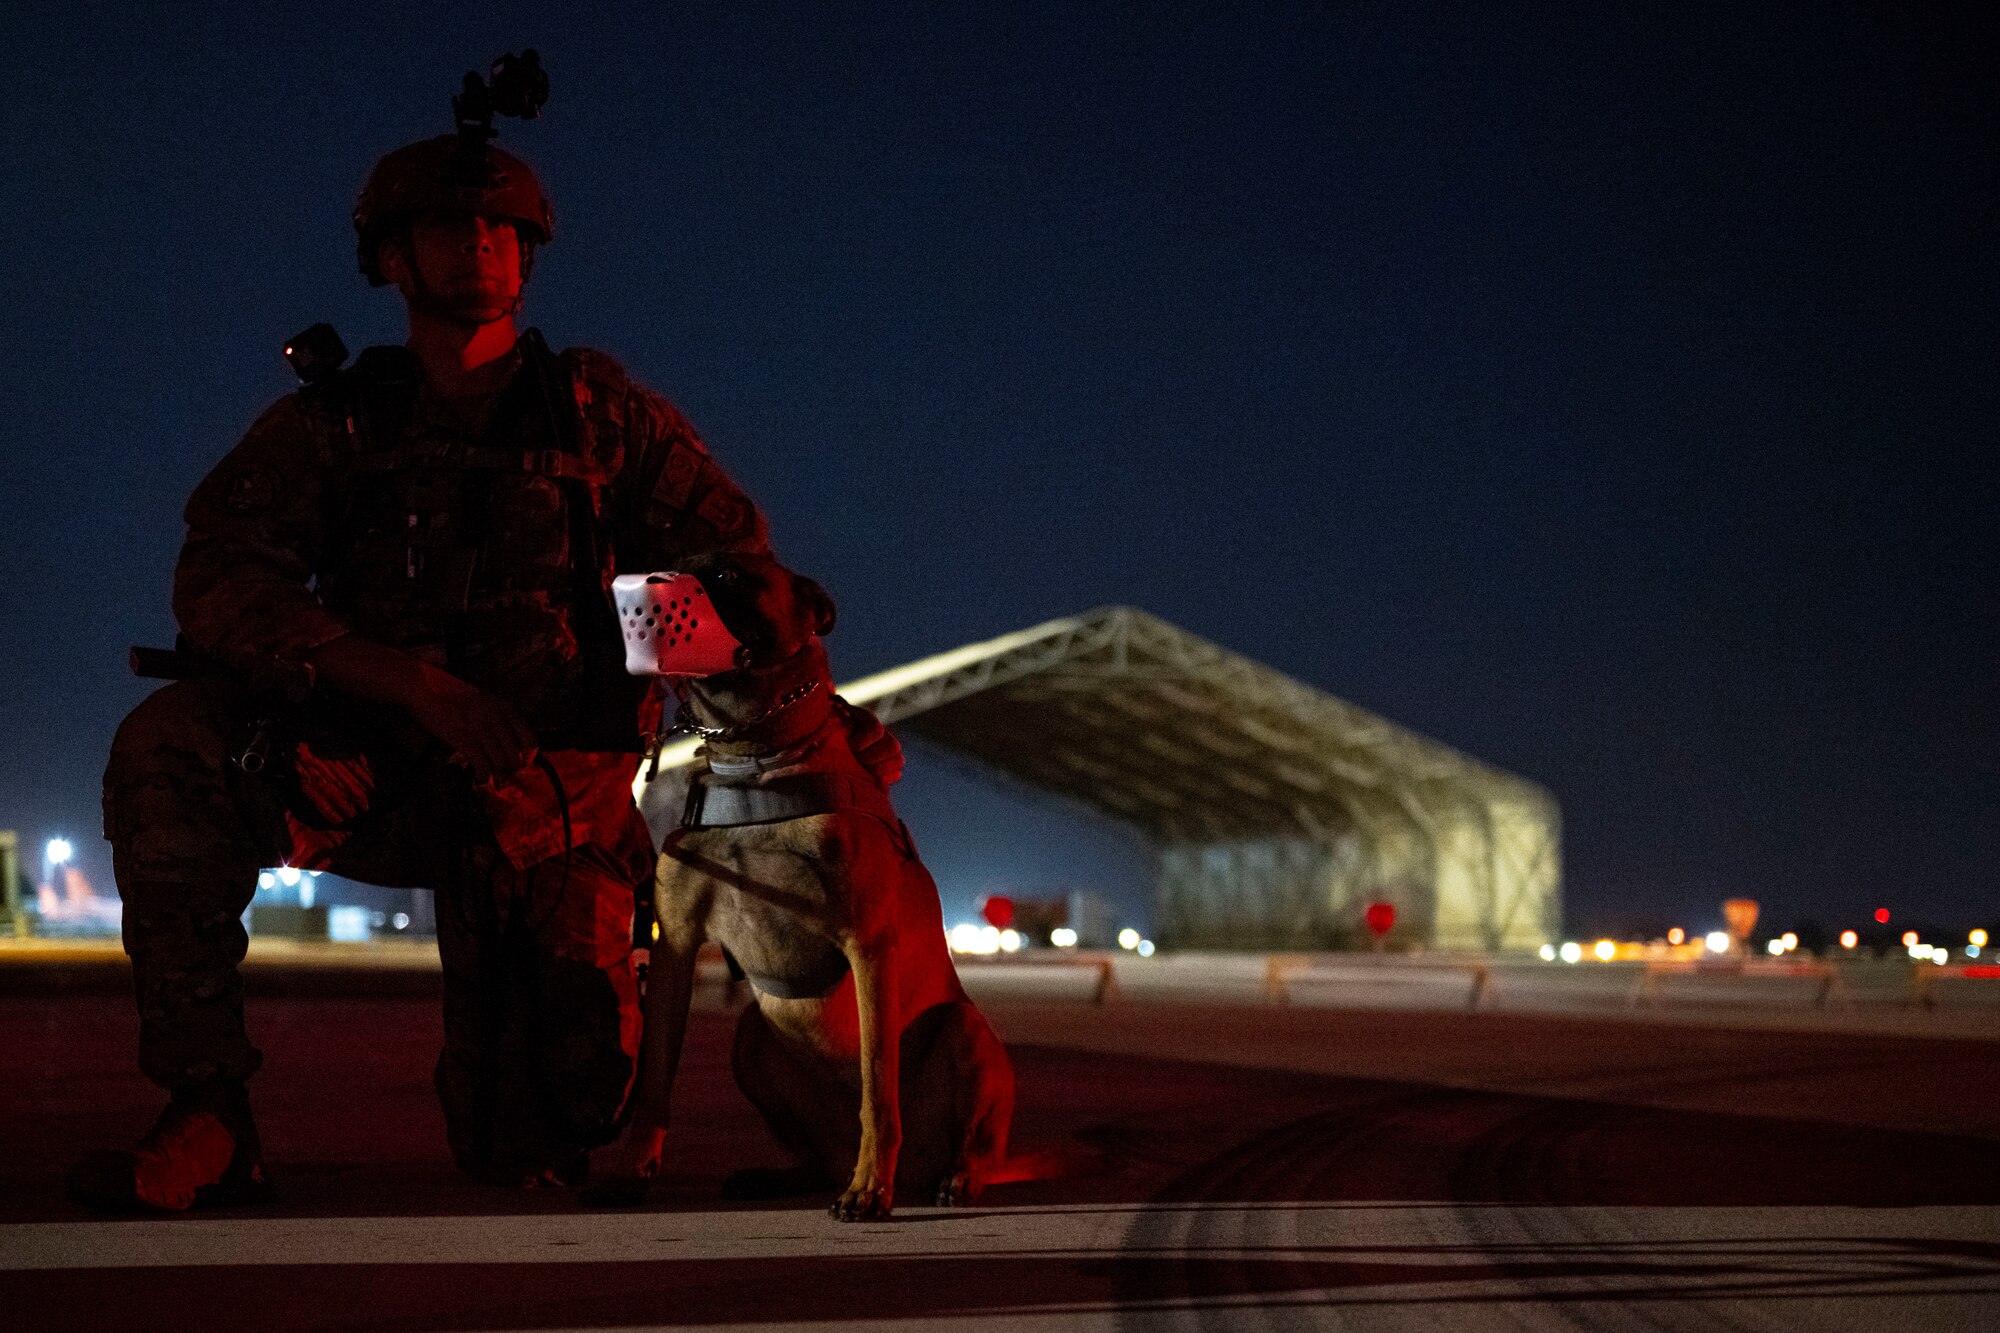 military working dog handler and his military working dog partner Ccura wait to board a U.S. Army UH-60 Black Hawk